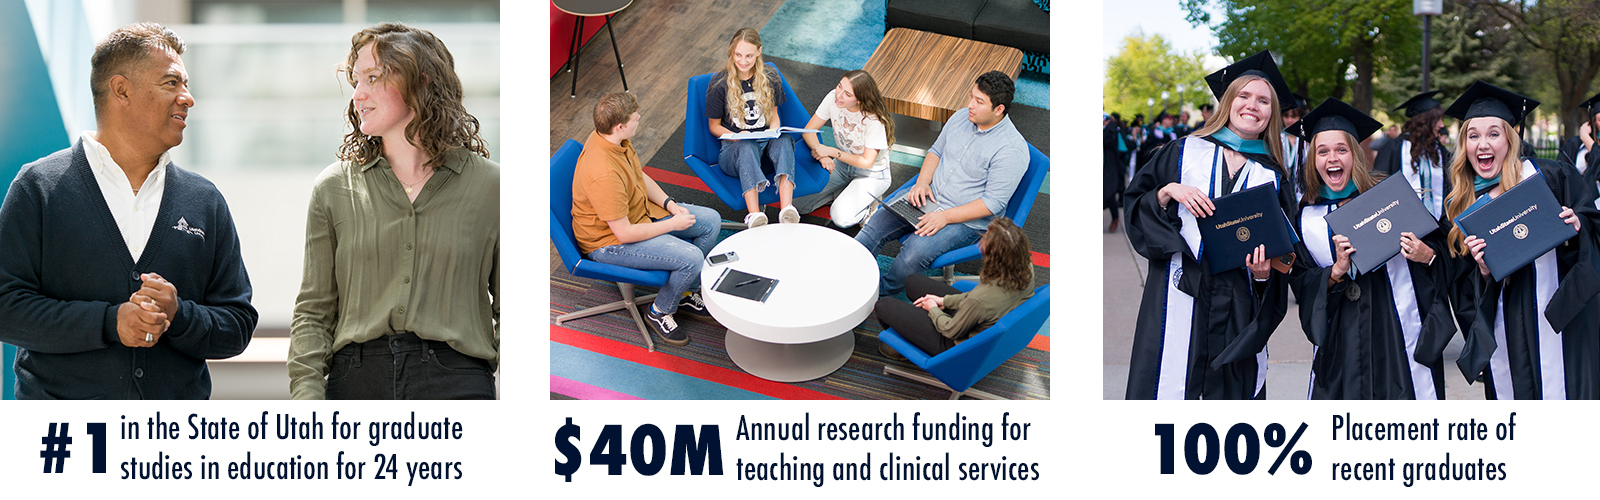 Infographic that states: #1 in State of Utah for graduate studies in education for 24 years, $40 million dollars annual research funding for teaching and clinical services, 100% placement rate of recent graduates.